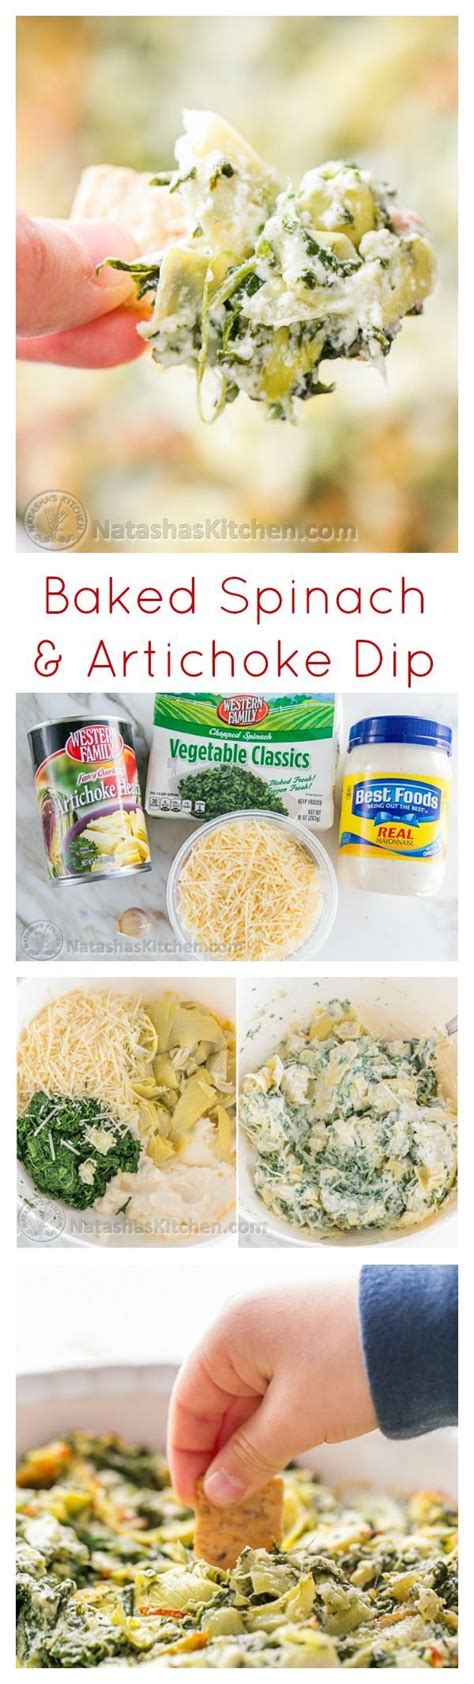 Baked Spinach And Artichoke Dip Recipe Is Shown In This Collage With Text Overlay